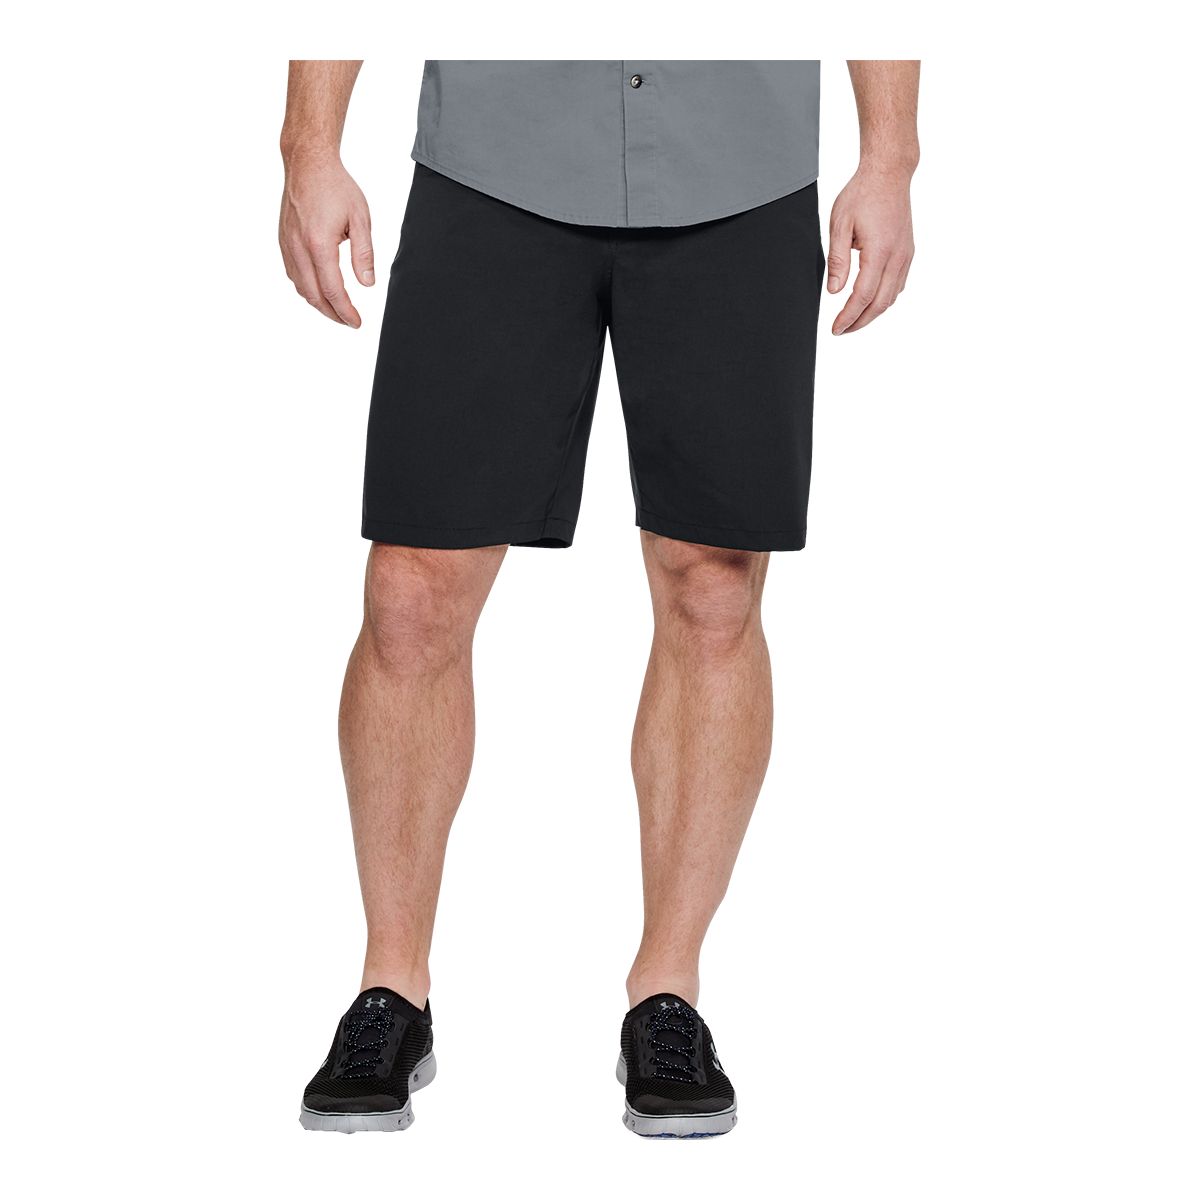 https://media-www.sportchek.ca/product/div-03-softgoods/dpt-72-casual-clothing/sdpt-01-mens/333040557/under-armour-men-s-fish-hunter-10-in-shorts-88507c23-81de-4c6f-a284-4c3e6fd086a6-jpgrendition.jpg